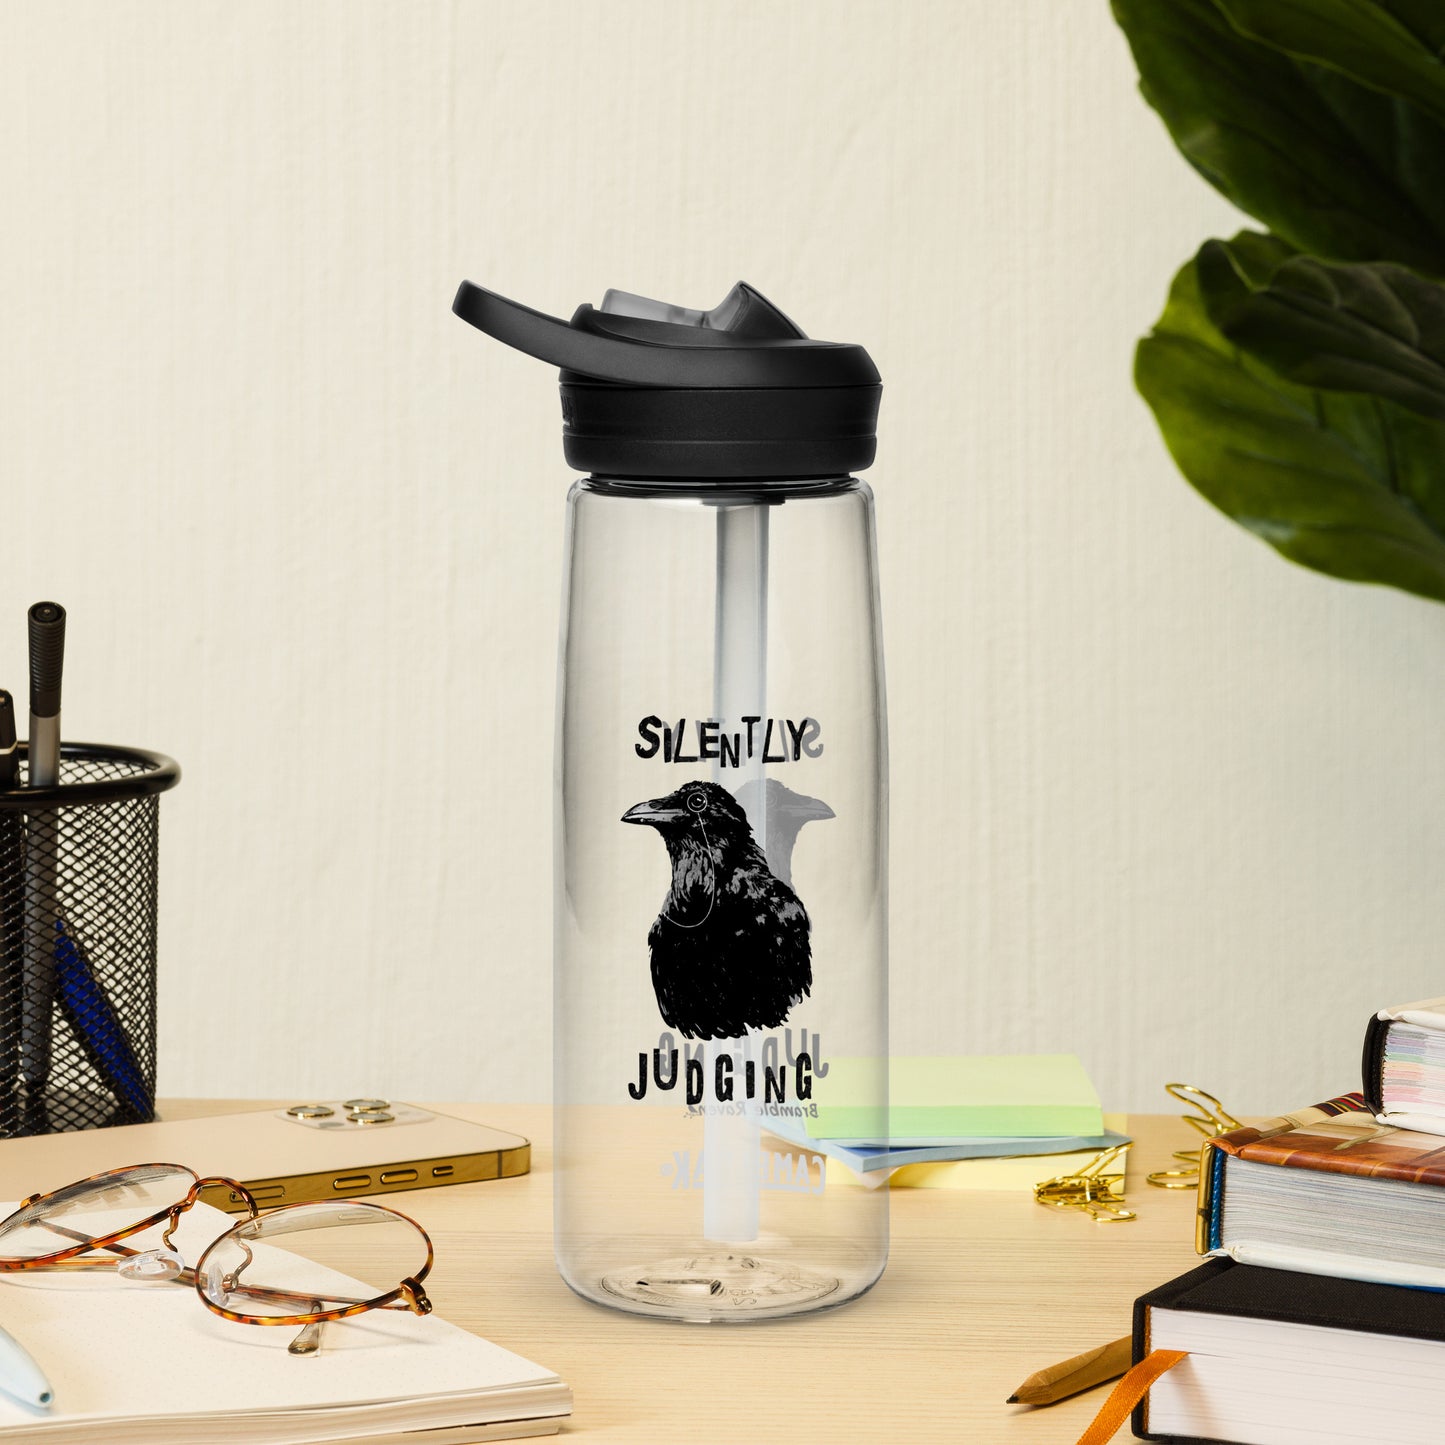 25 ounce sports water bottle with spill-proof lid and bite valve. Clear stain and odor-resistant BPA-free plastic. Features double-sided design of Silently Judging Crow with his monocle. Shown on desk by books, pen holder, and glasses.